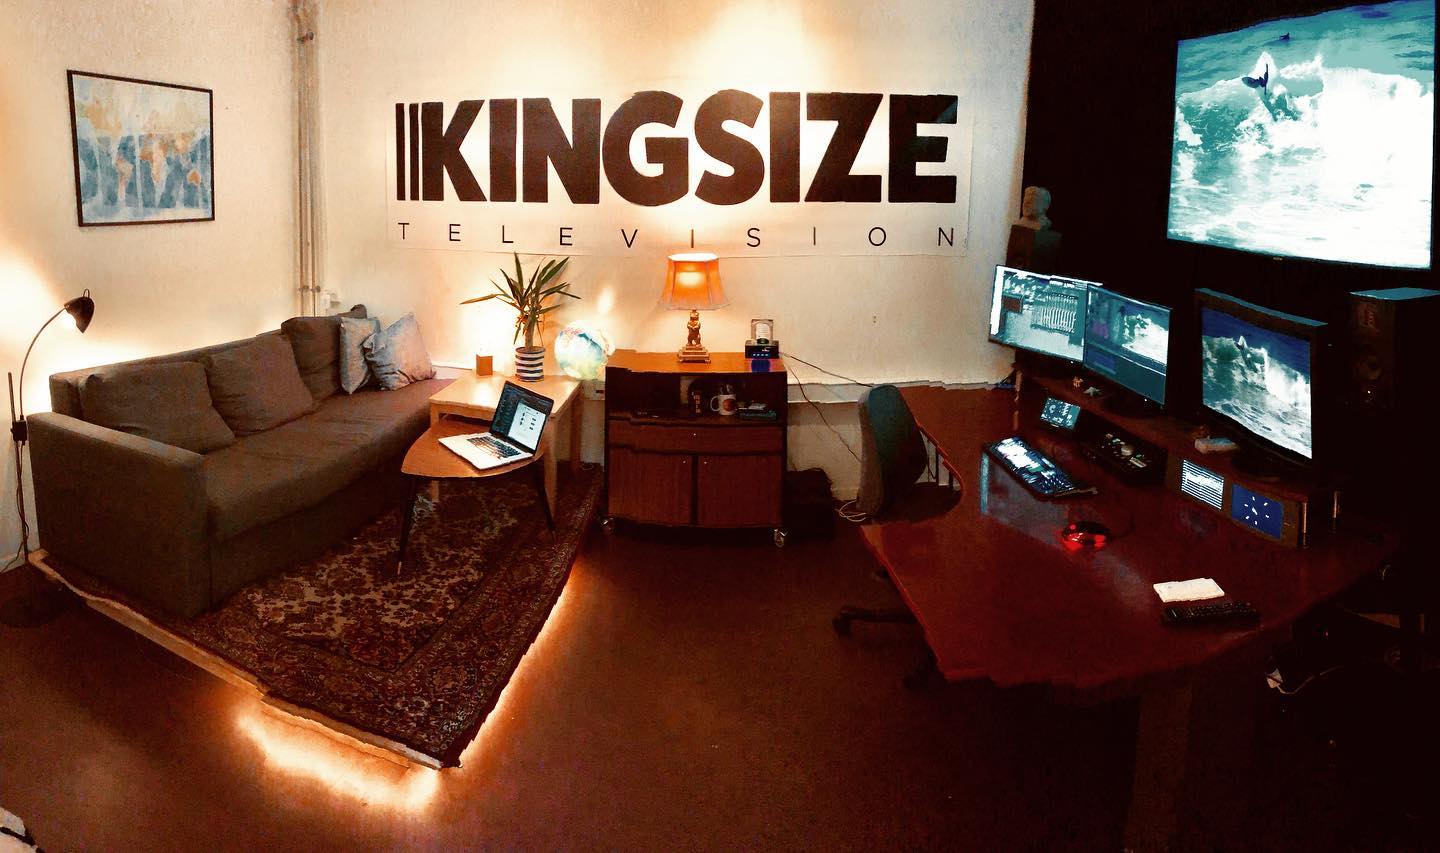 Home, Suite Home ✂️📺
@kingsize_television
#television #editing